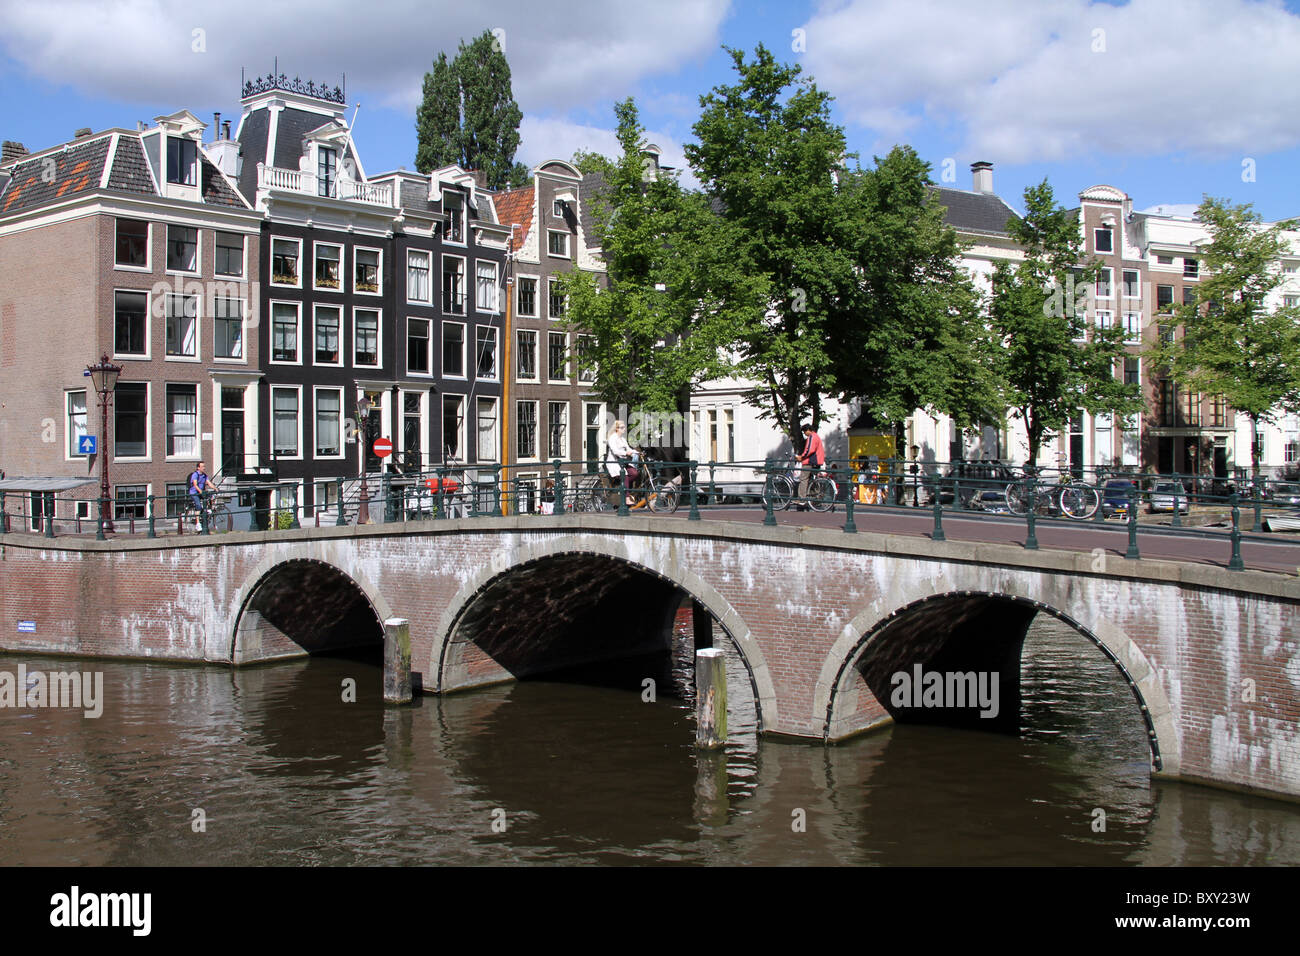 Bridge on the canal at Leidse Gracht in Amsterdam, Holland Stock Photo